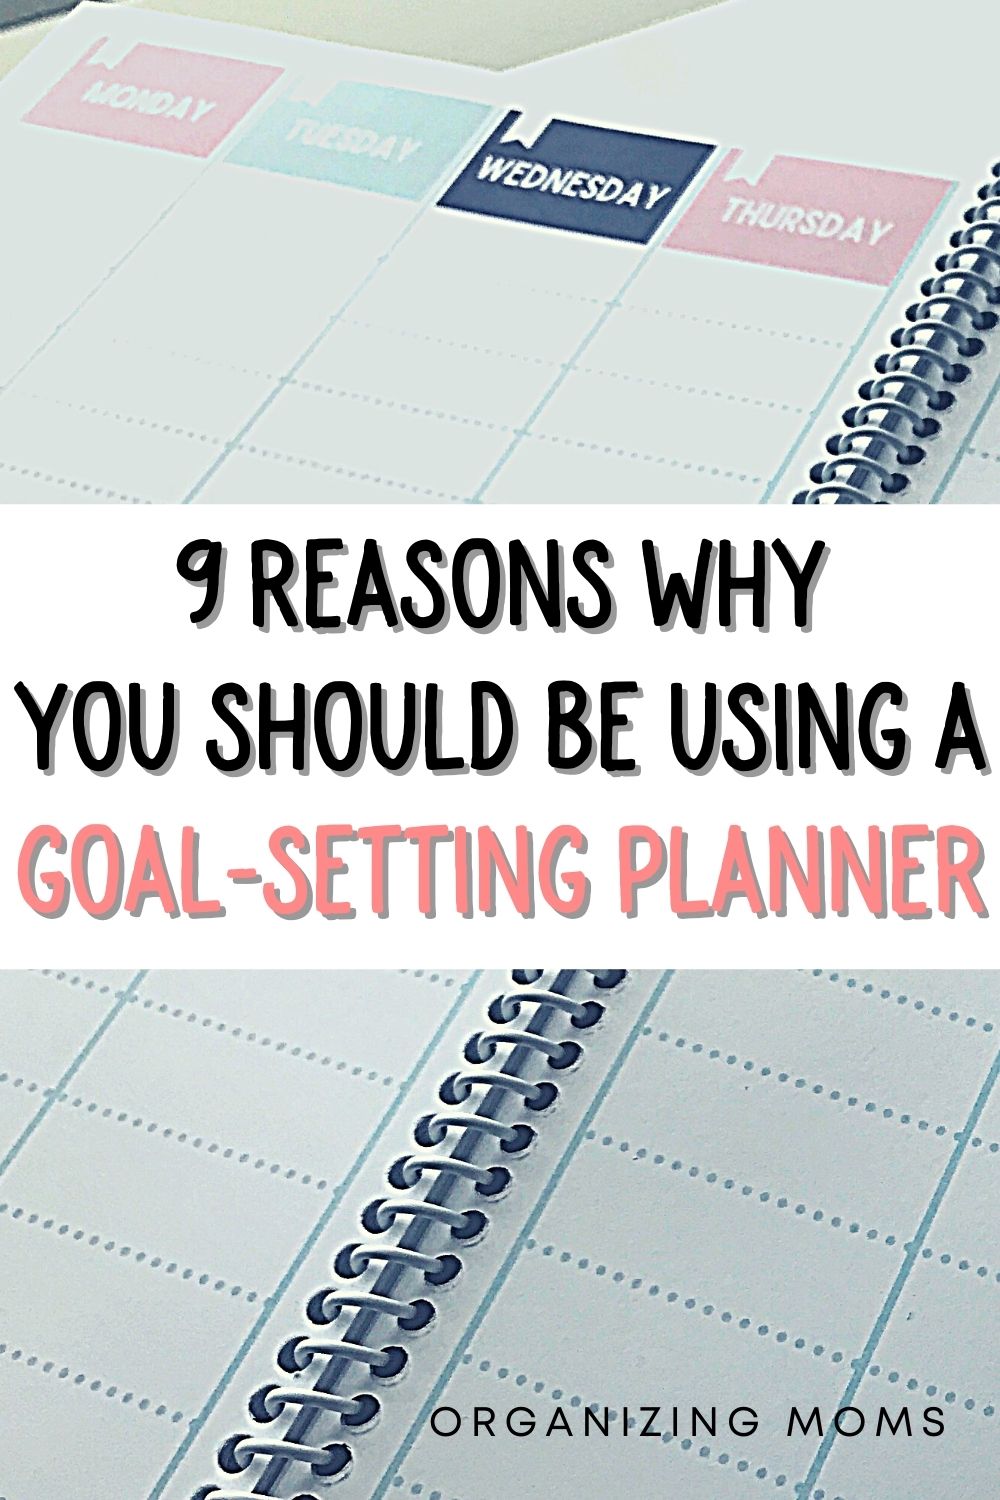 text - 9 reasons why you should be using a goal setting planner background image of planner laid out on table